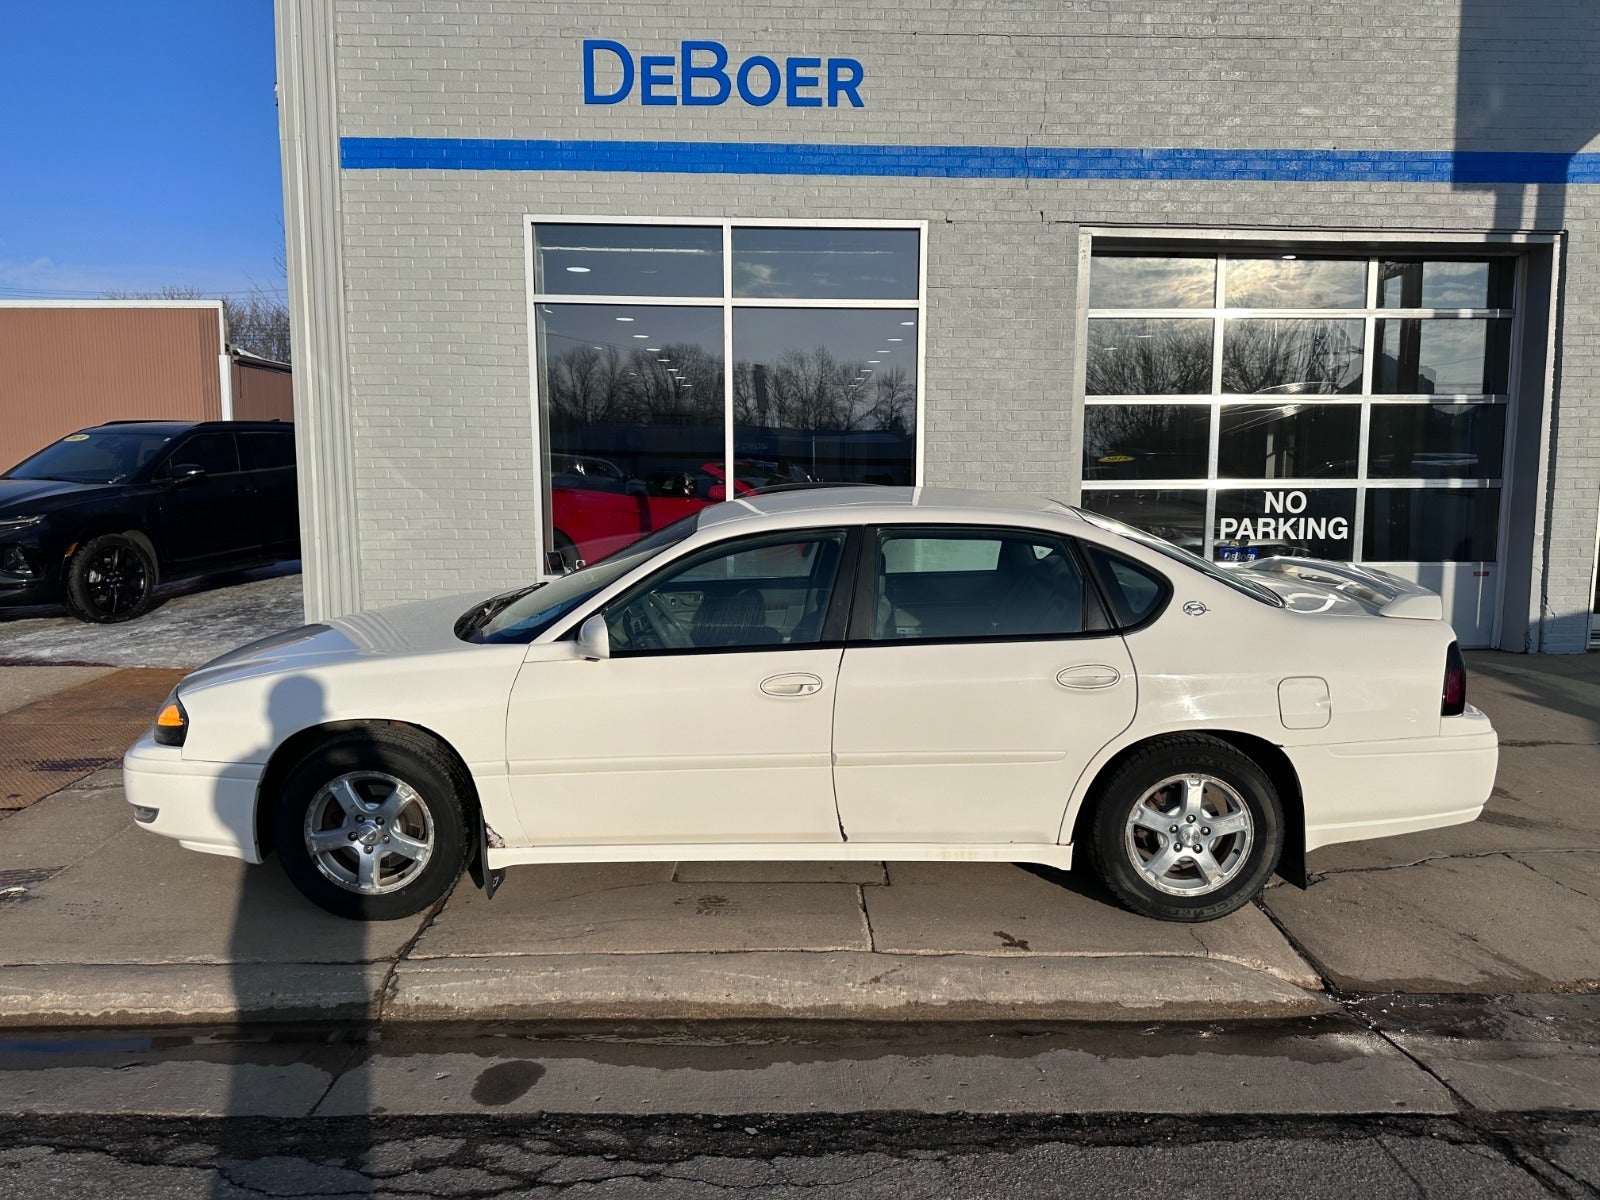 Used 2005 Chevrolet Impala LS with VIN 2G1WH52K559320435 for sale in Edgerton, Minnesota